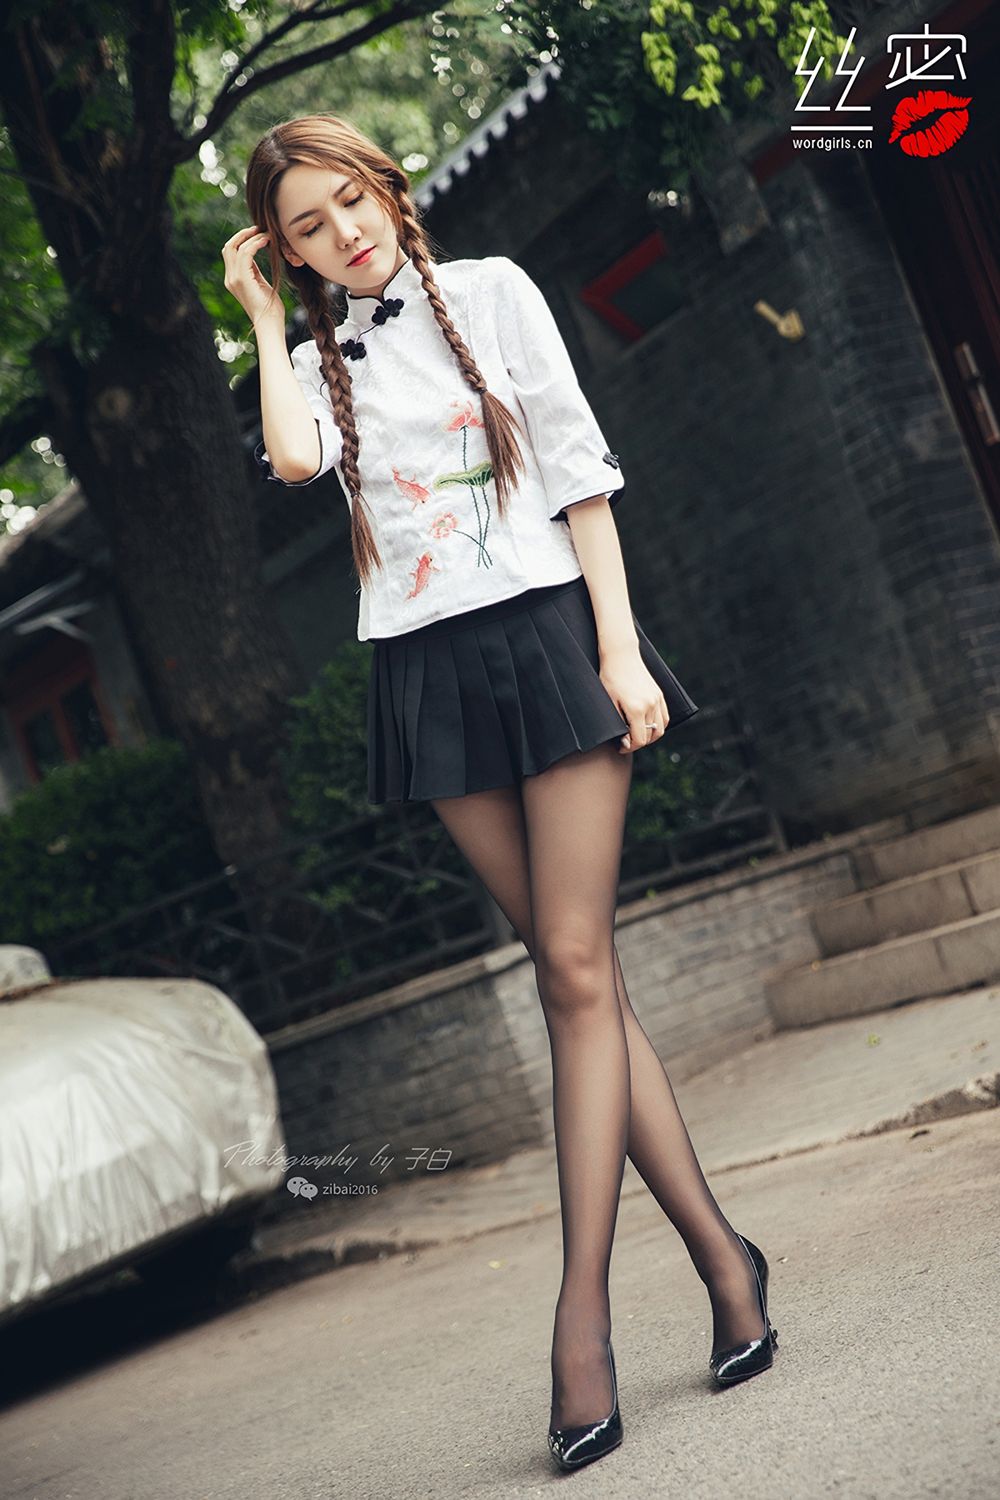 [TouTiao Girls] The black silk chick in the alley